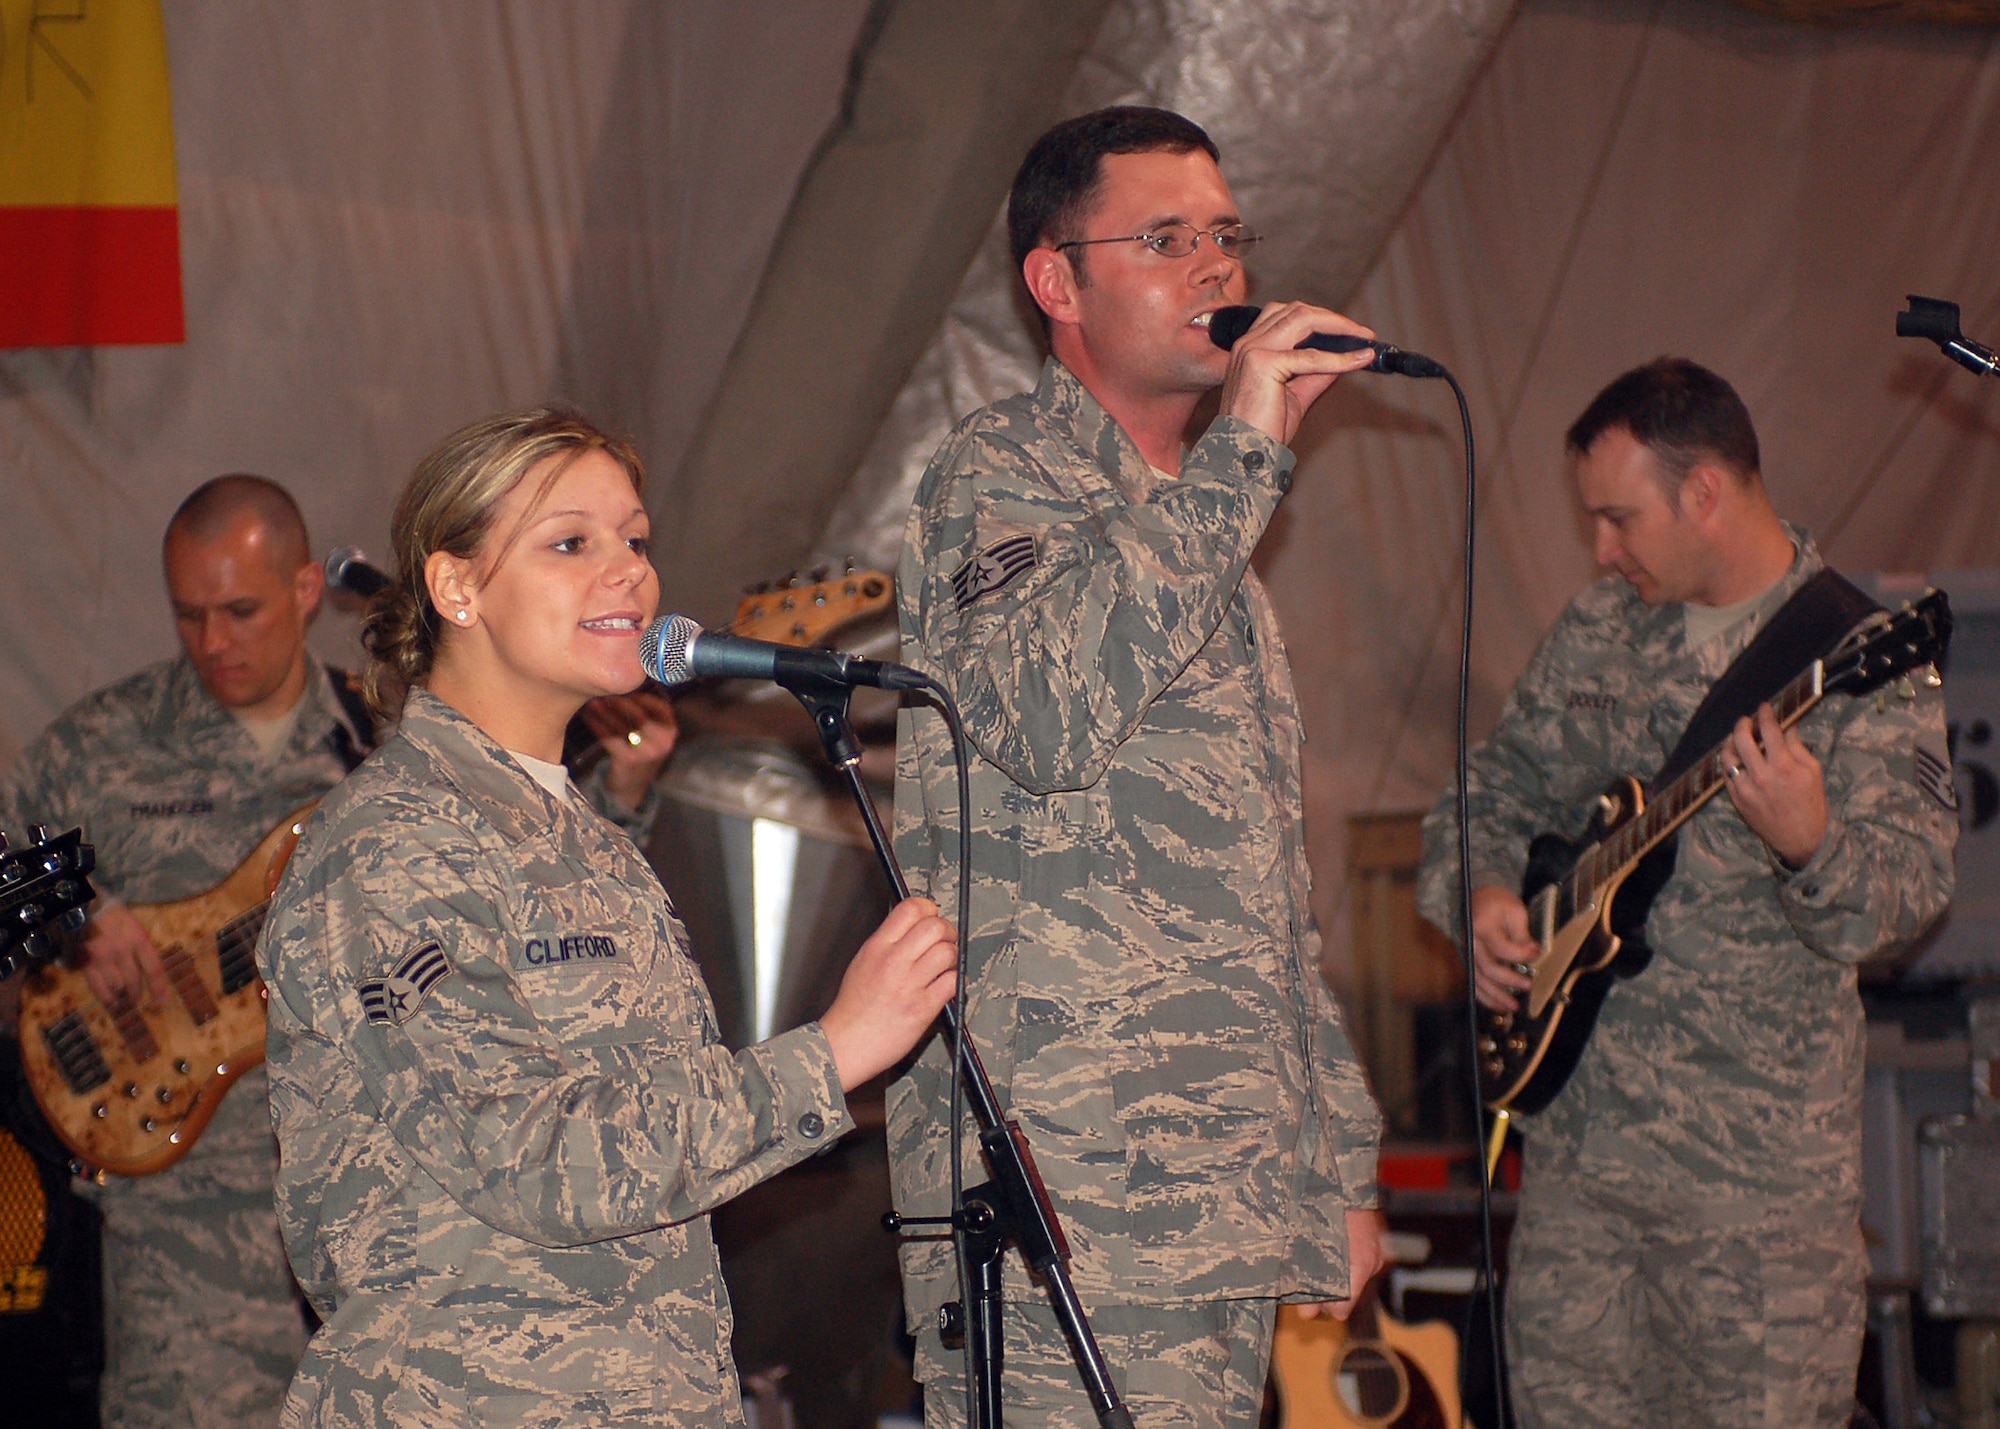 Vocalists Senior Airman Courtney Clifford and Staff Sgt. Geoff Fisher, accompanied by bass player Staff Sgt. Mark Frandsen, and guitarist Staff Sgt. Gene Dooley, belt out a tune for coalition forces during one of their final performance at Manas Air Base, Kyrgyzstan, March 21. Sirocco, the U.S. Air Forces Central Expeditionary Band is deployed to Southeast Asia from the U.S. Air Forces in Europe Band at Sembach AB, Germany. (U.S. Air Force photo/Tech. Sgt. Elizabeth Weinberg) 